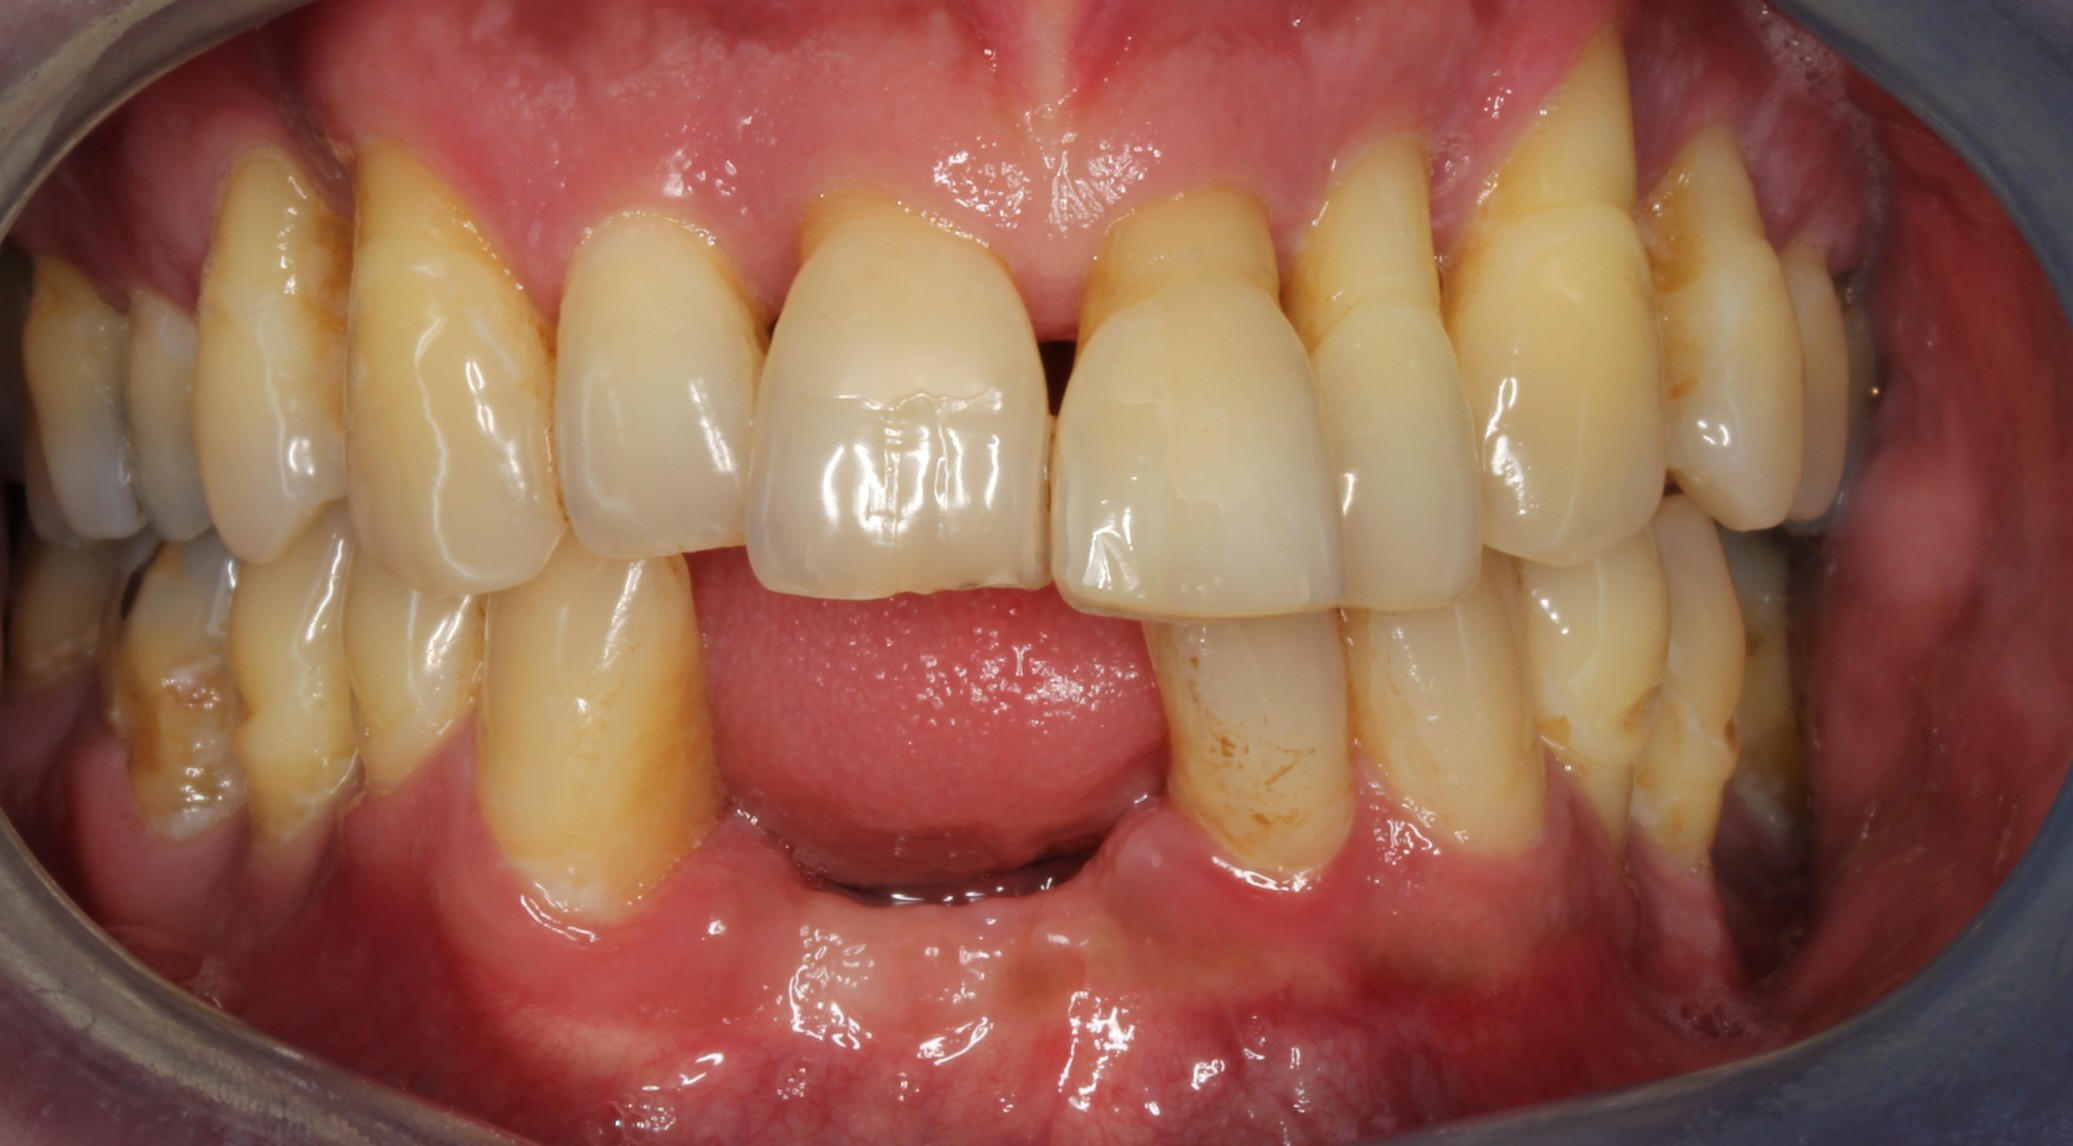 patient presented with tooth caused by sinus infection anterior aspect